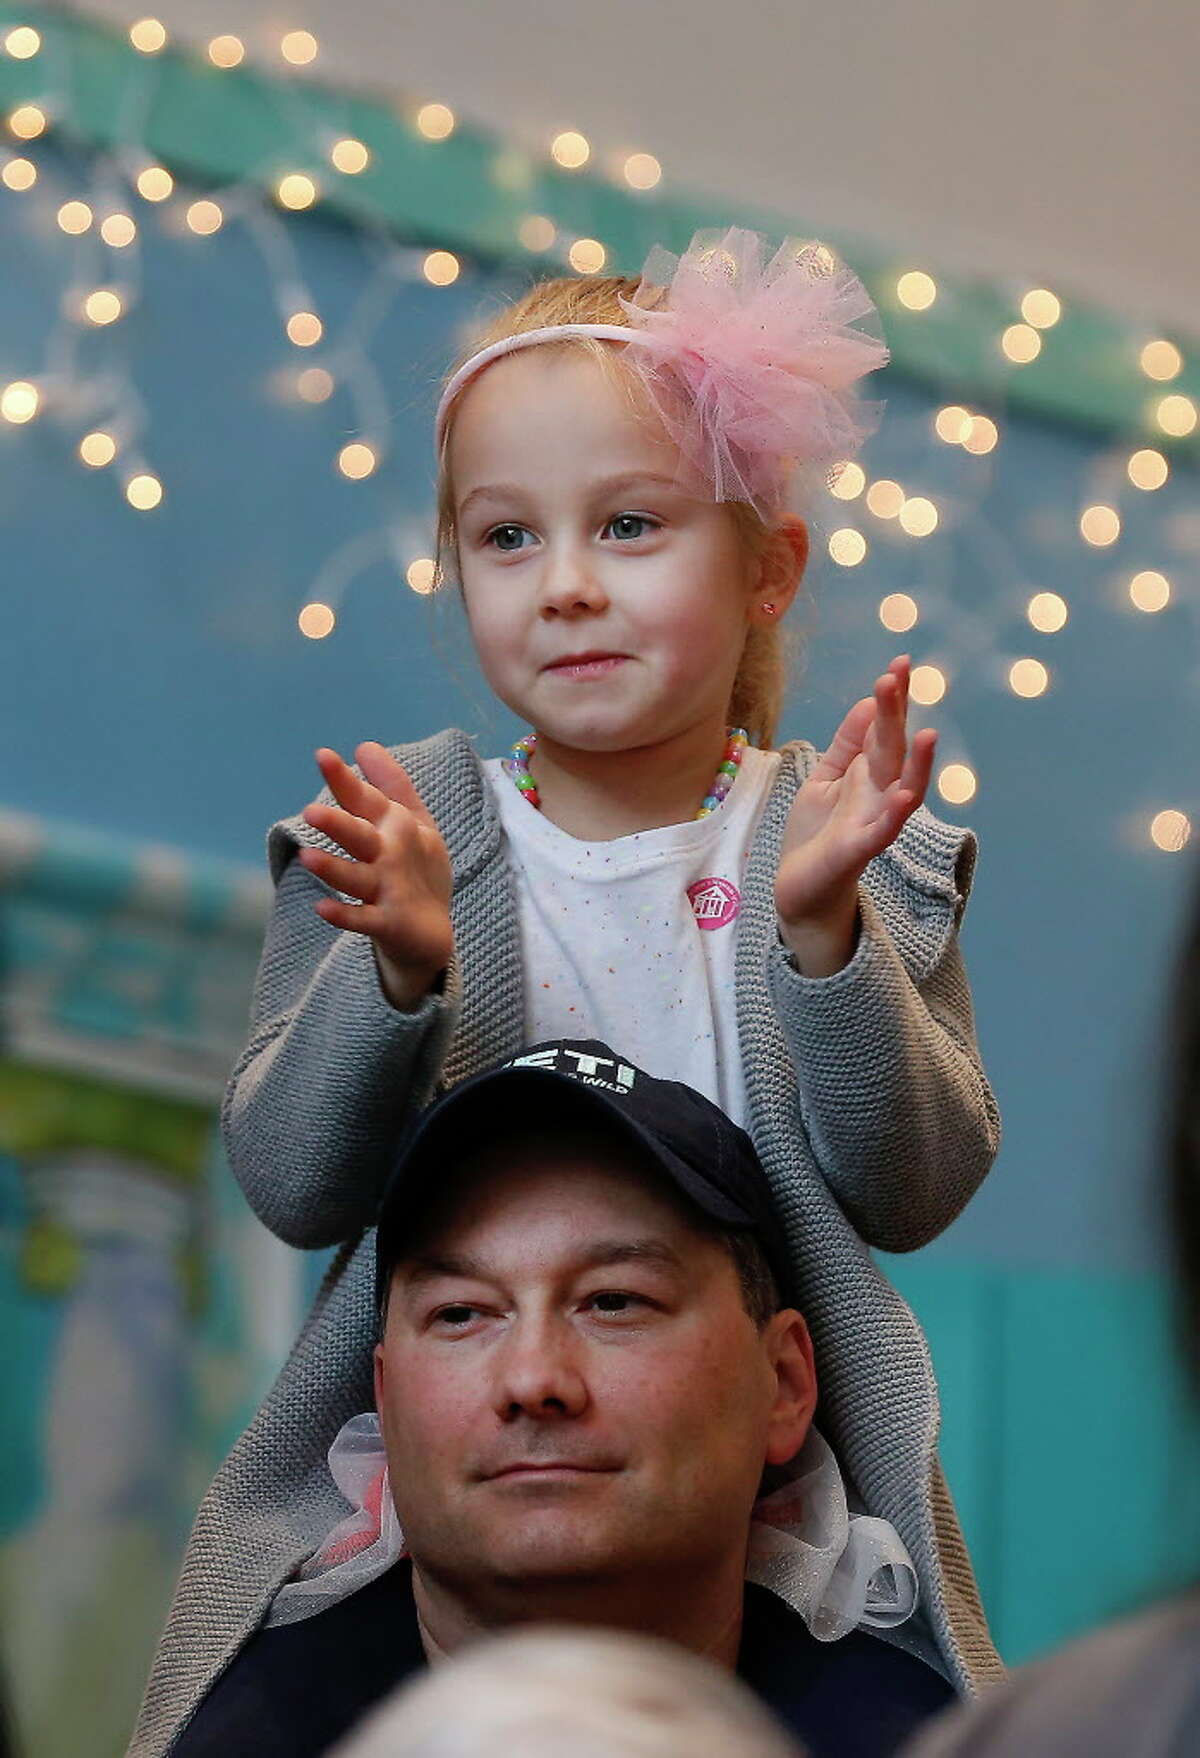 Elizabeth Baudin, 4, enjoys the view from her father's, Brandon, shoulders during The Children's Museum of Houston's Rockin' New Year's Noon Bash Sunday, Dec. 31, 2017, in Houston. The event is the city's longest-running New Year's Eve celebration just for kids. This end-of-year bash rings in the New Year at the stroke of noon with a parade and shimmering ball drop.